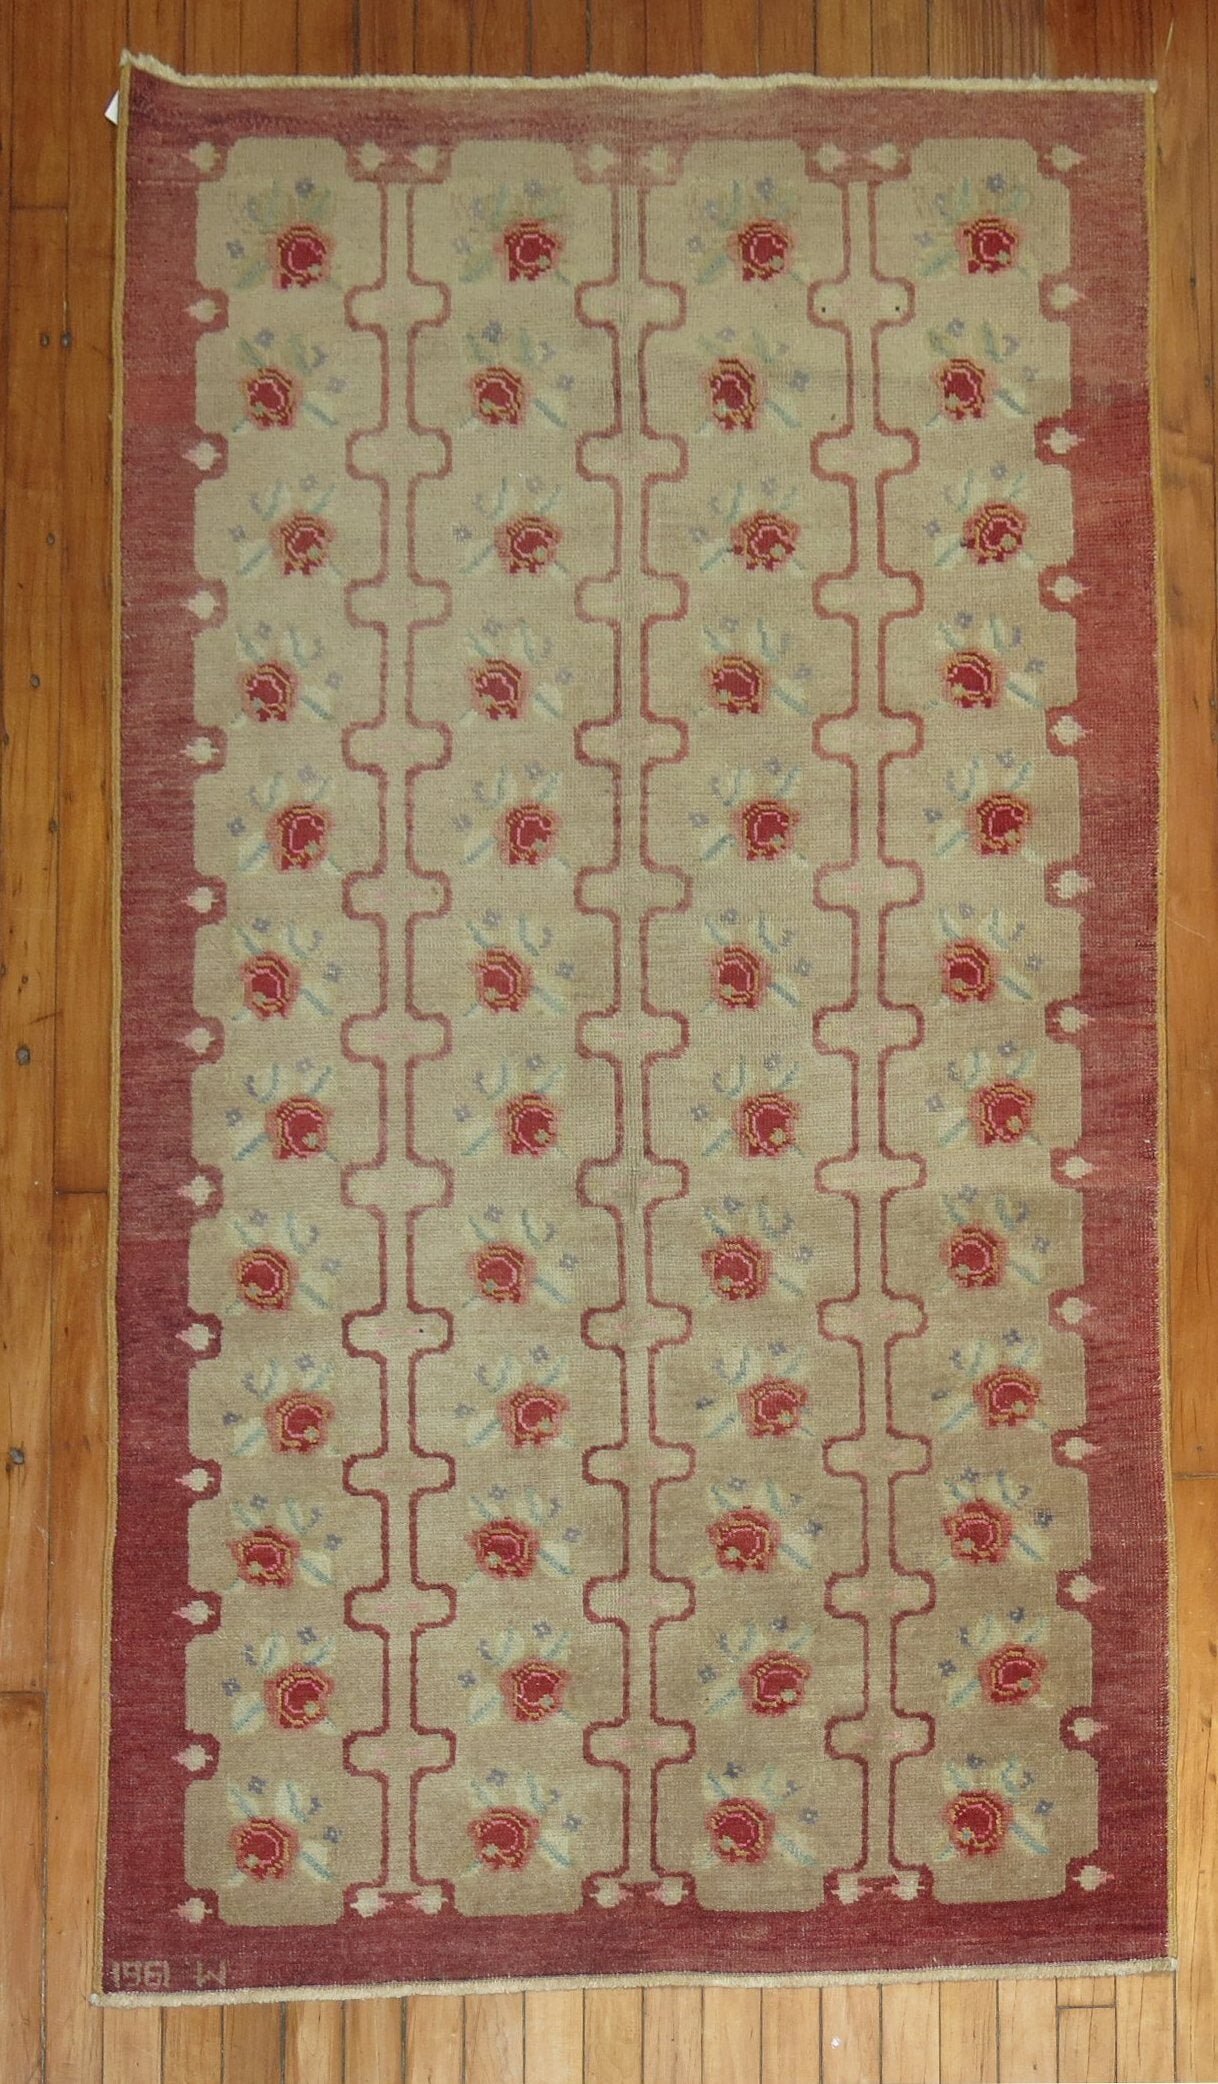 Vintage Turkish Konya rug with repeating floral motif design in raspberry tones on a brown ground. Date found on end border, dated 1961.

Measures: 3'5